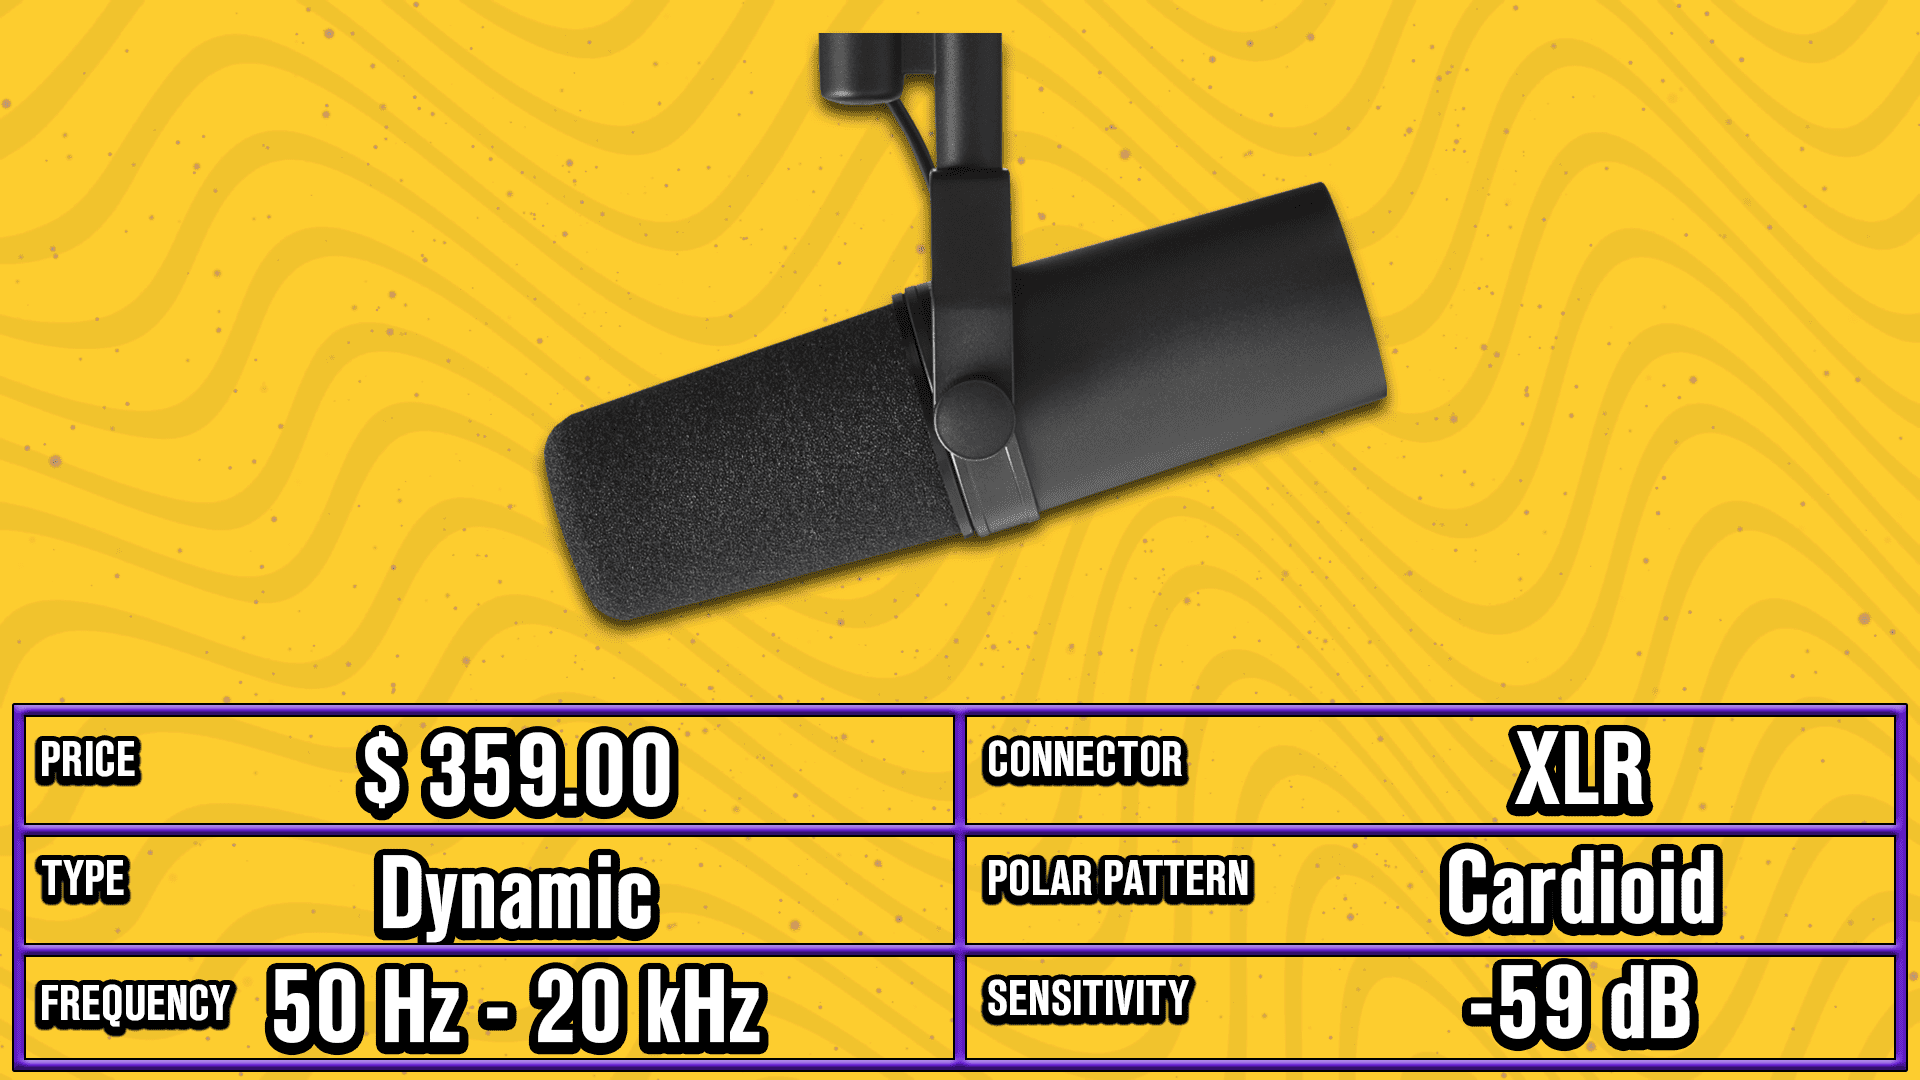 Shure SM7B microphone for streaming/gaming